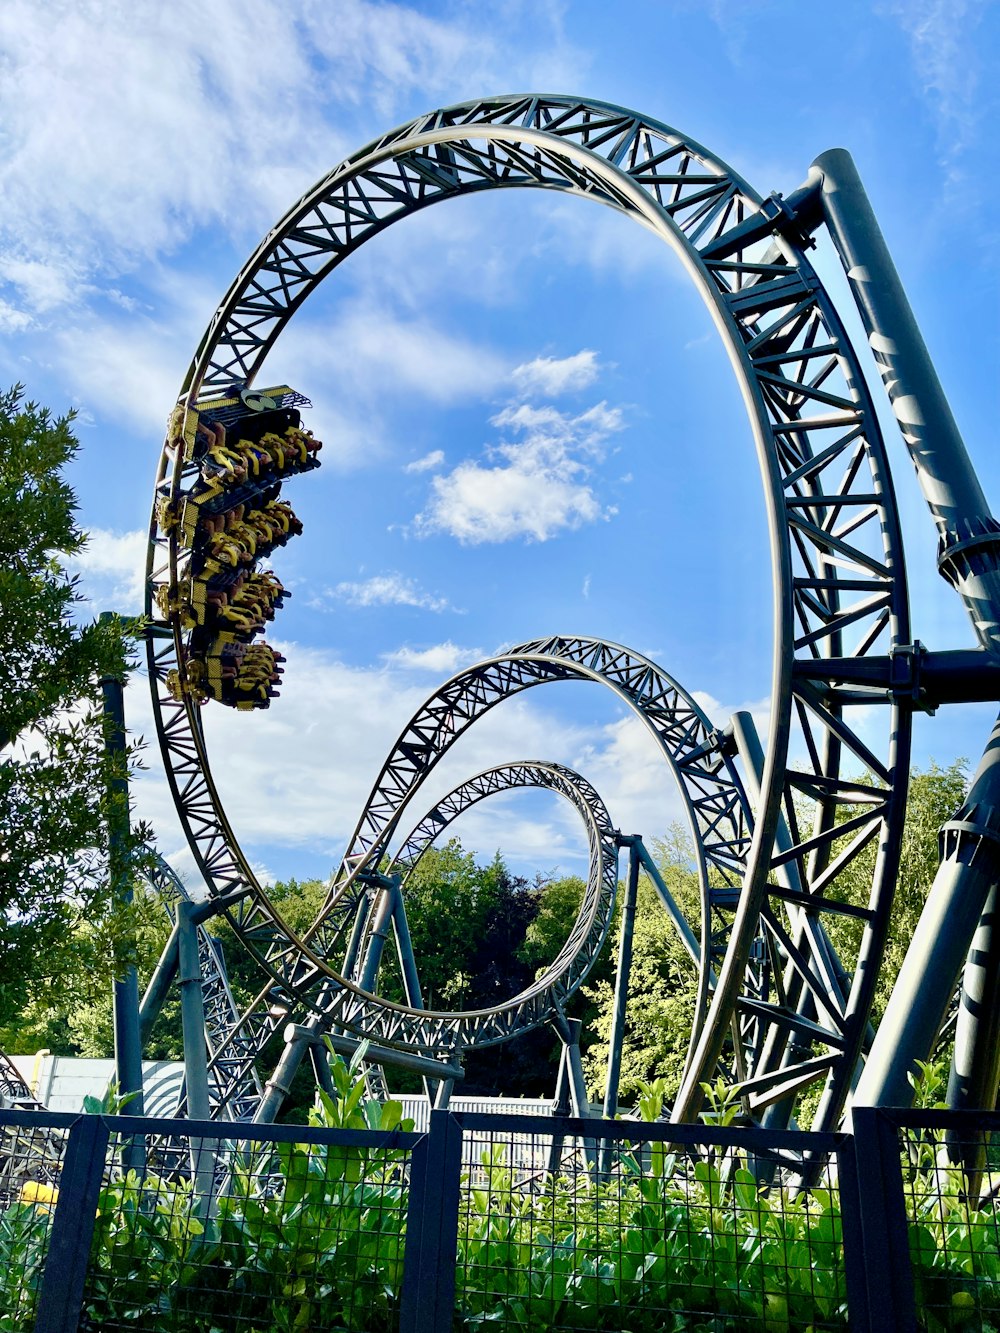 green and brown roller coaster under blue sky during daytime